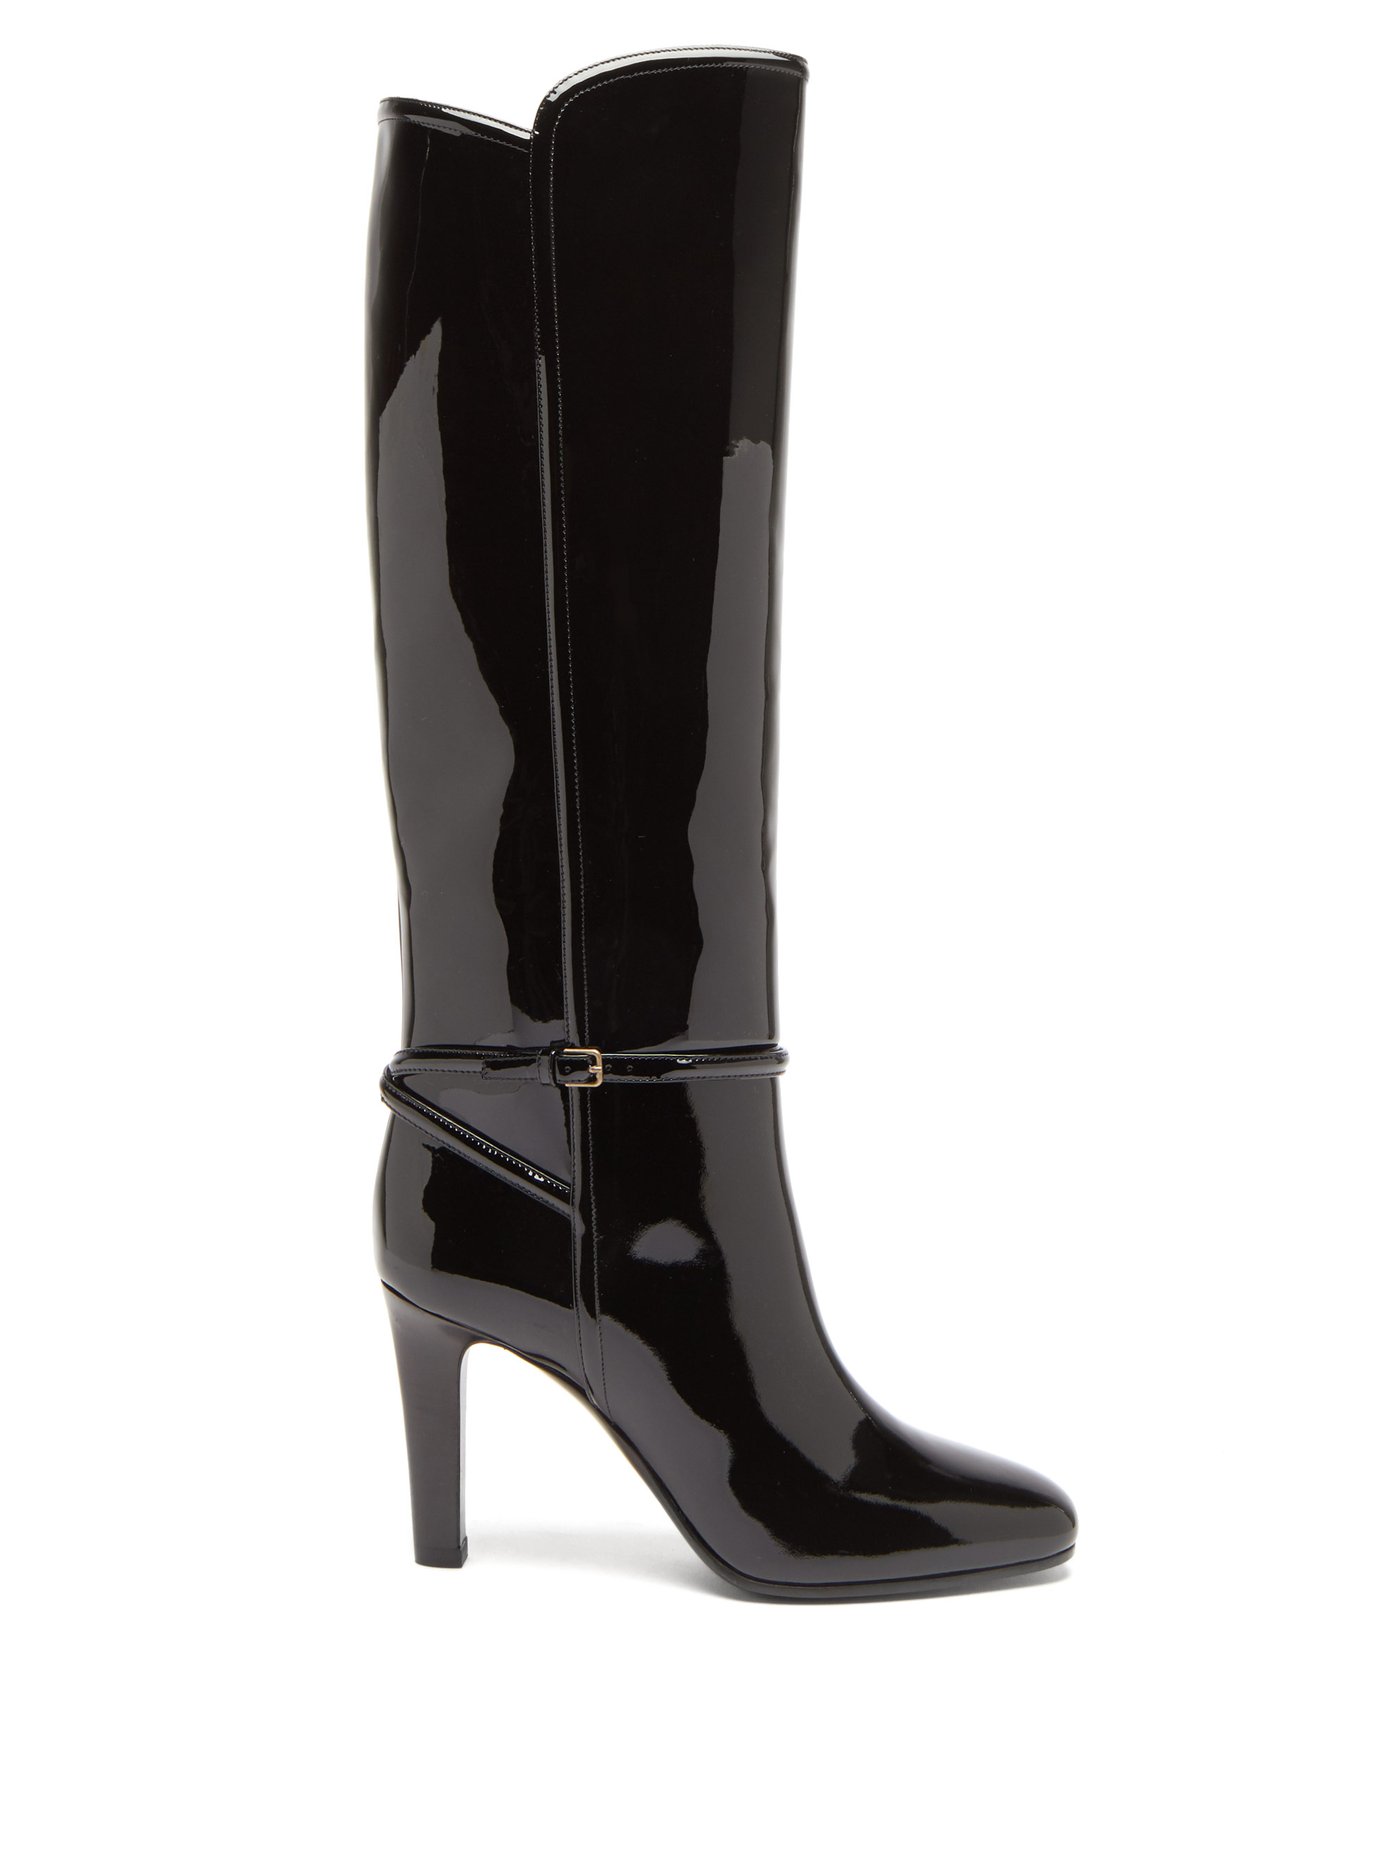 black patent leather boots knee high